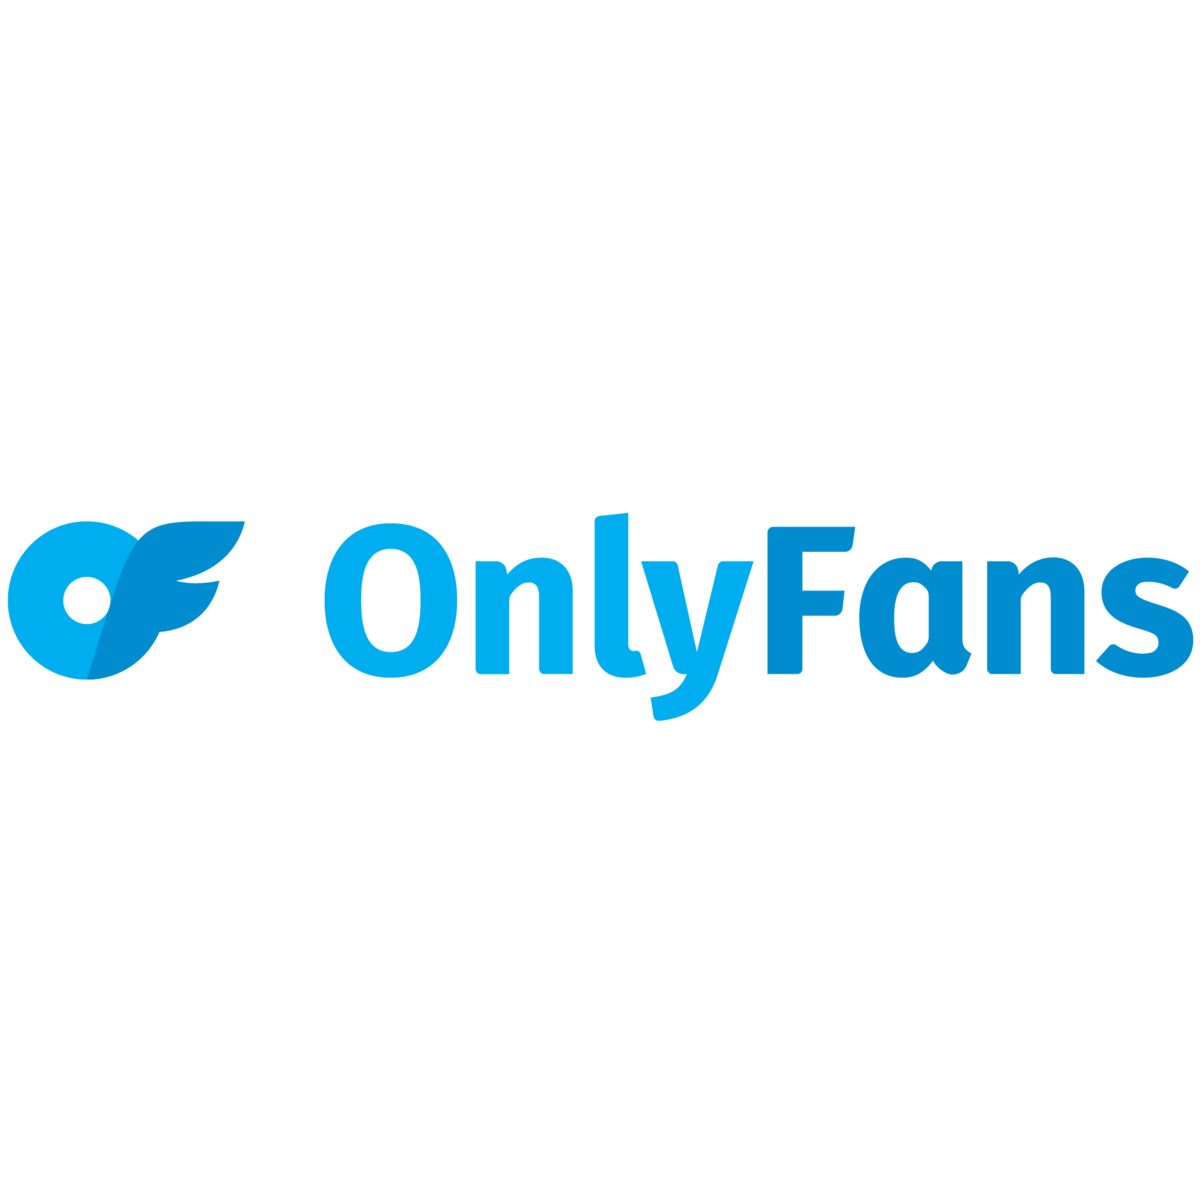 Process onlyfans verification How To